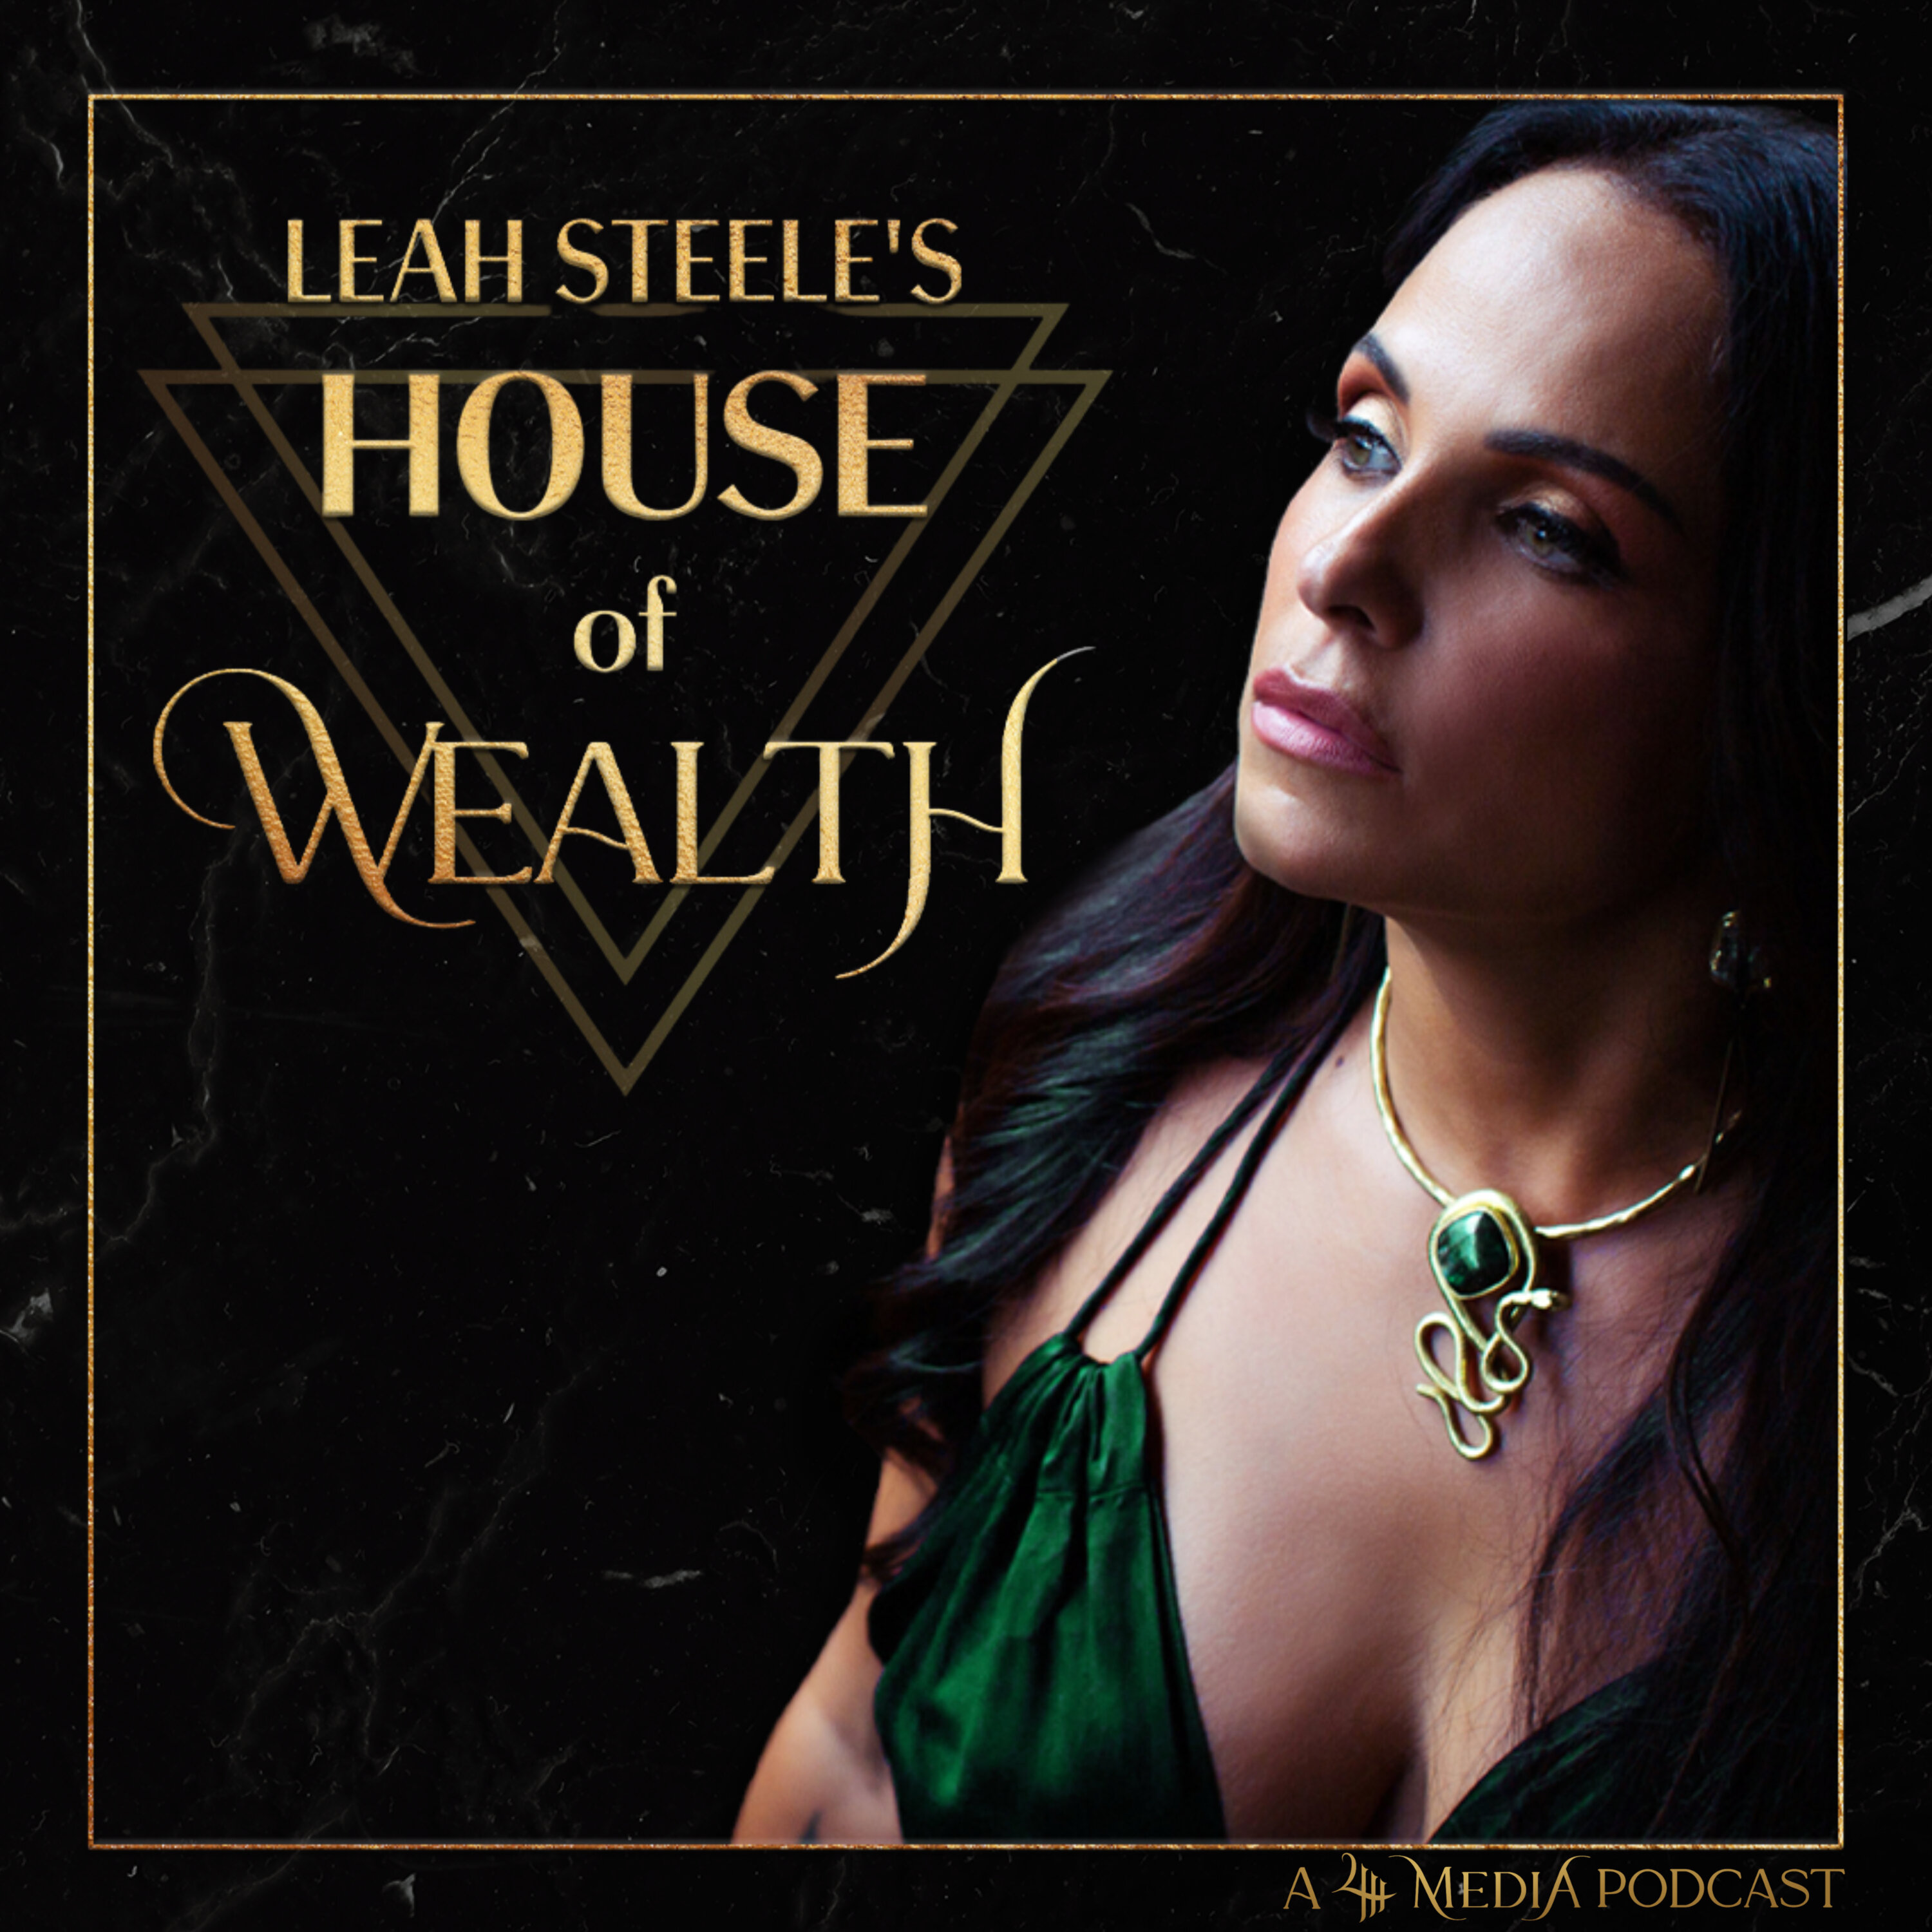 House of Wealth podcast show image